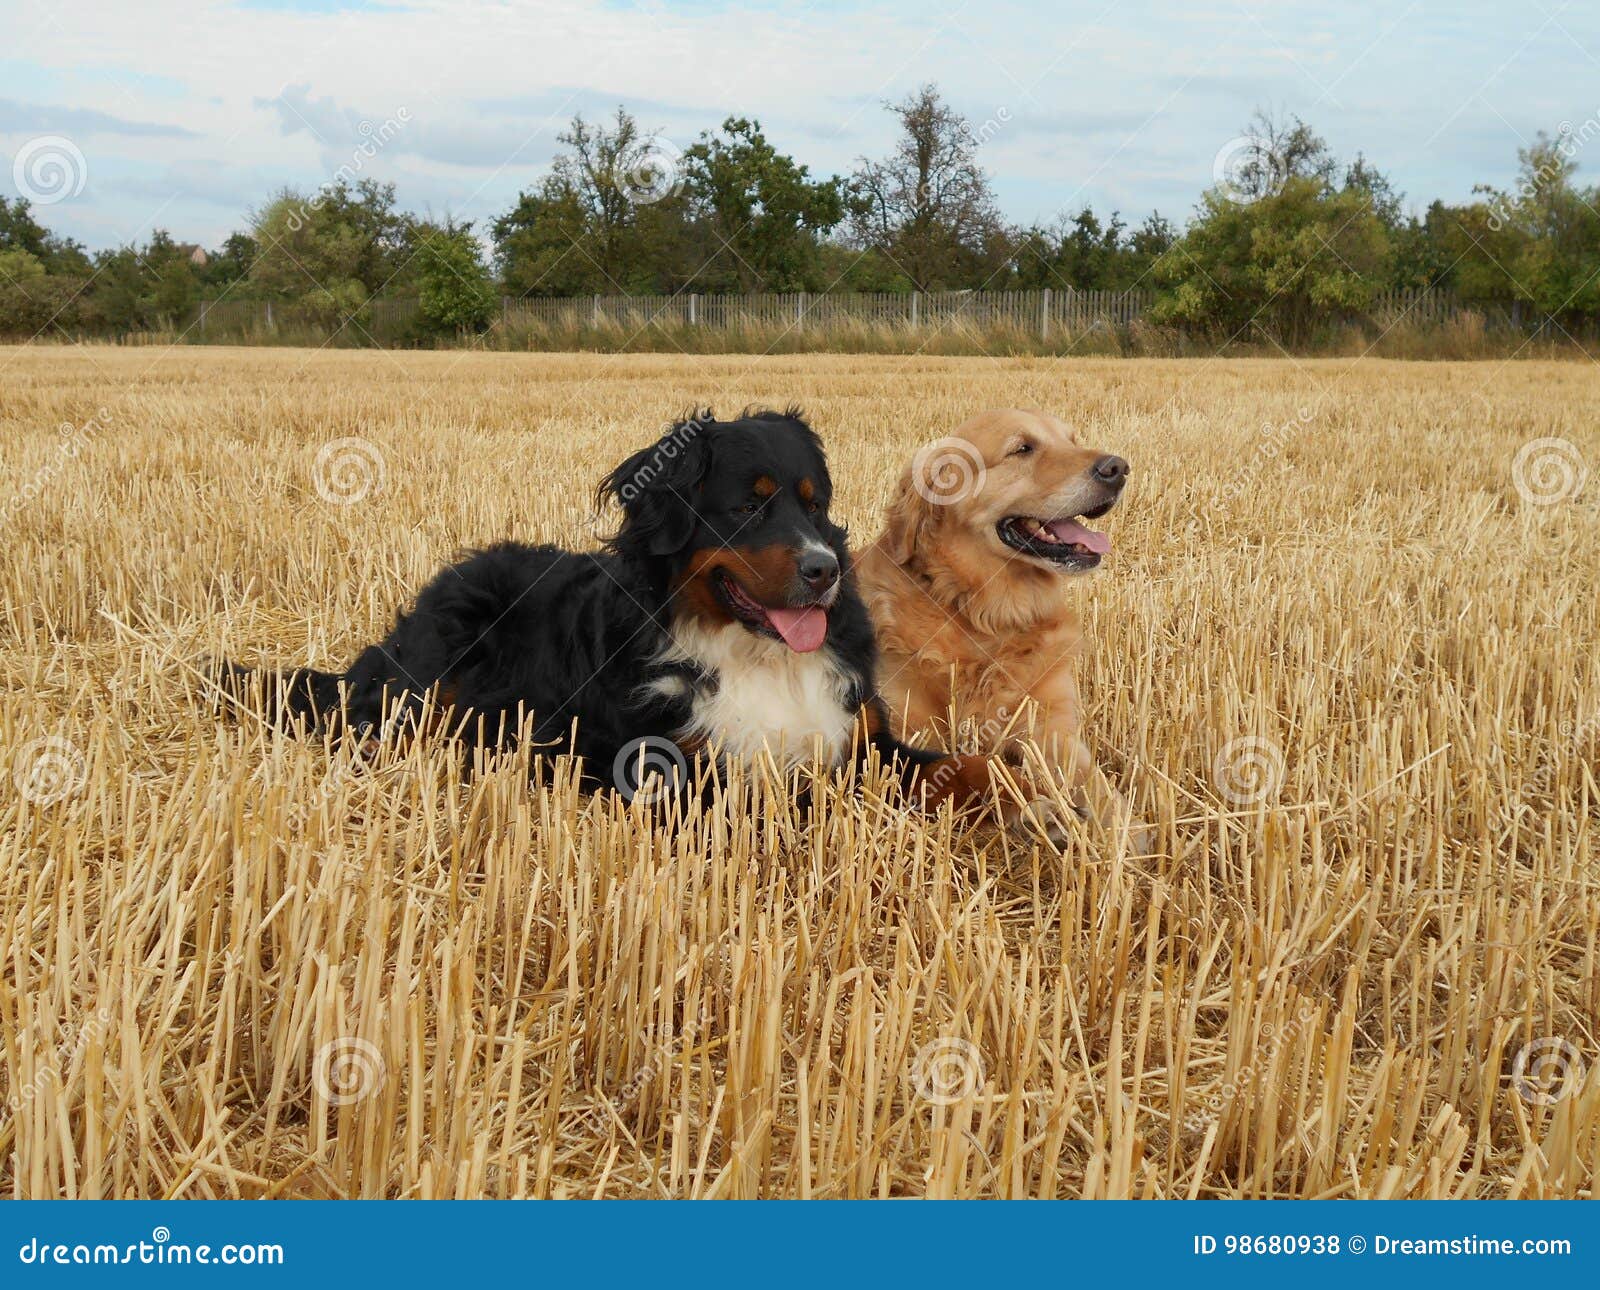 Bernese Mountain Dog And Golden Retriever In The Cornfield Stock Photo Image Of Nature Grain 98680938